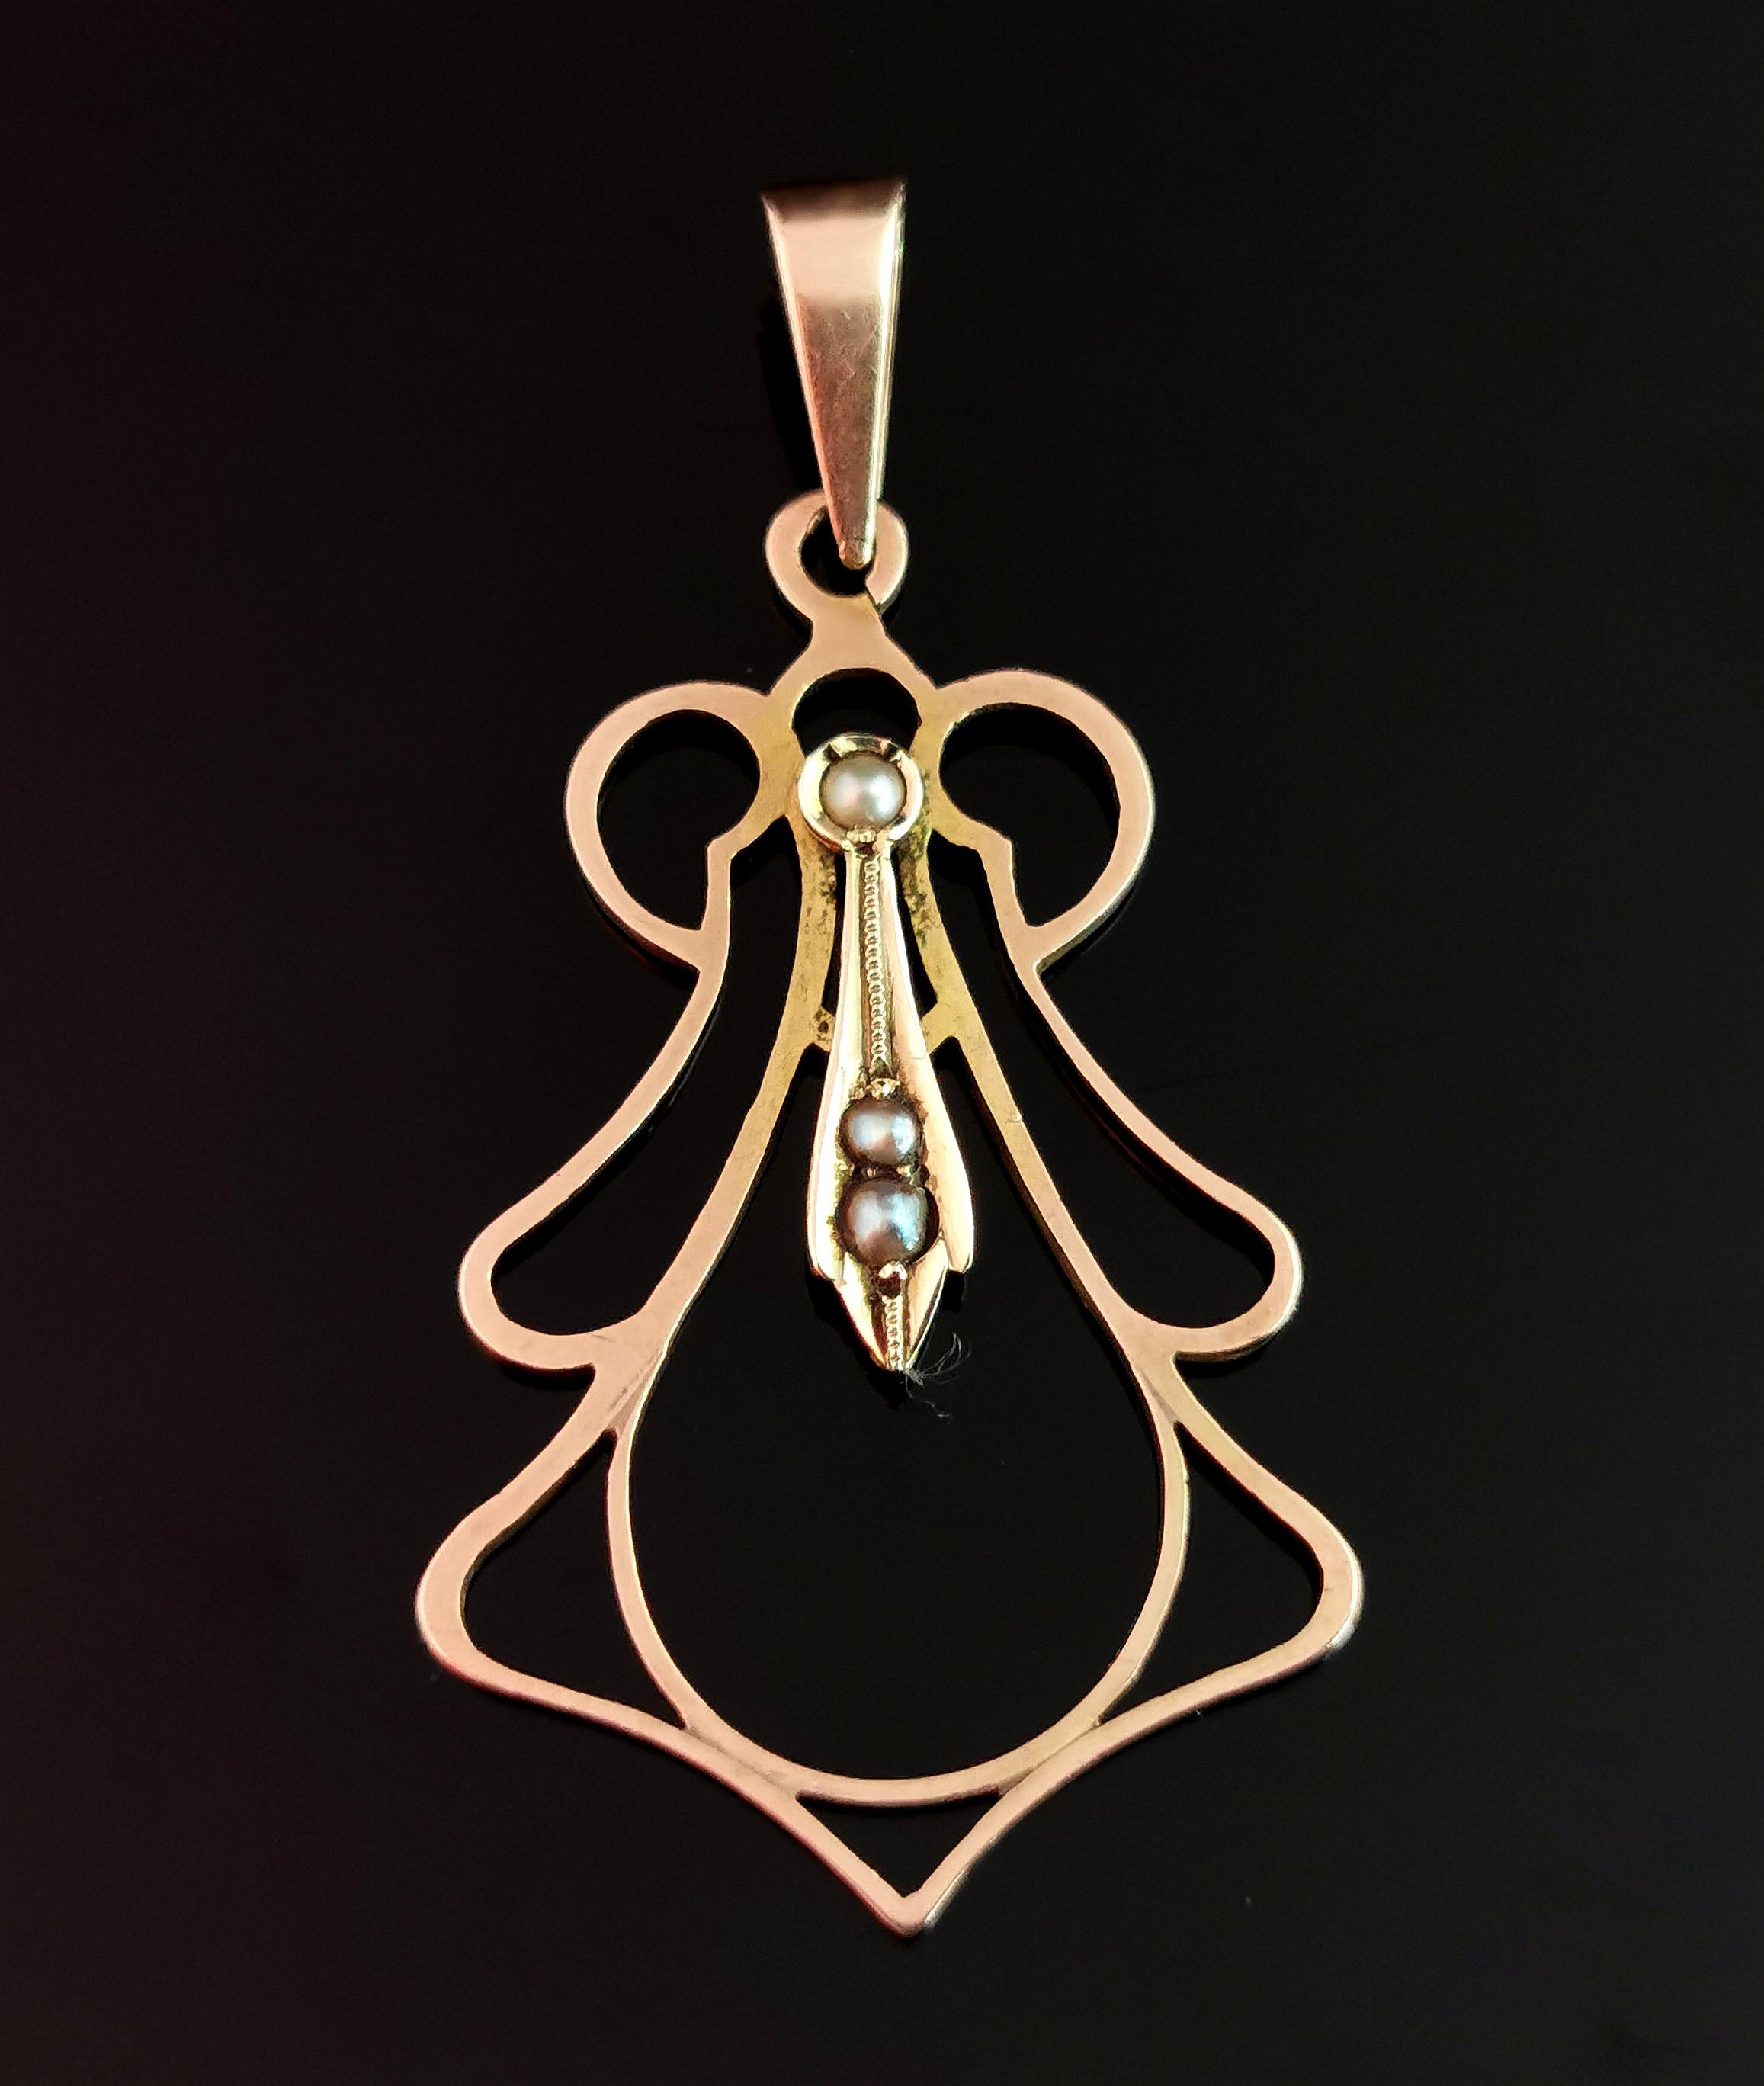 A beautiful antique, Art Nouveau era seed pearl pendant in 9k gold. 

The pendant is a kite or teardrop shape, openwork with scrolling and curved accents.

To the centre the pendant is set with three tiny creamy seed pearl and it has an integral